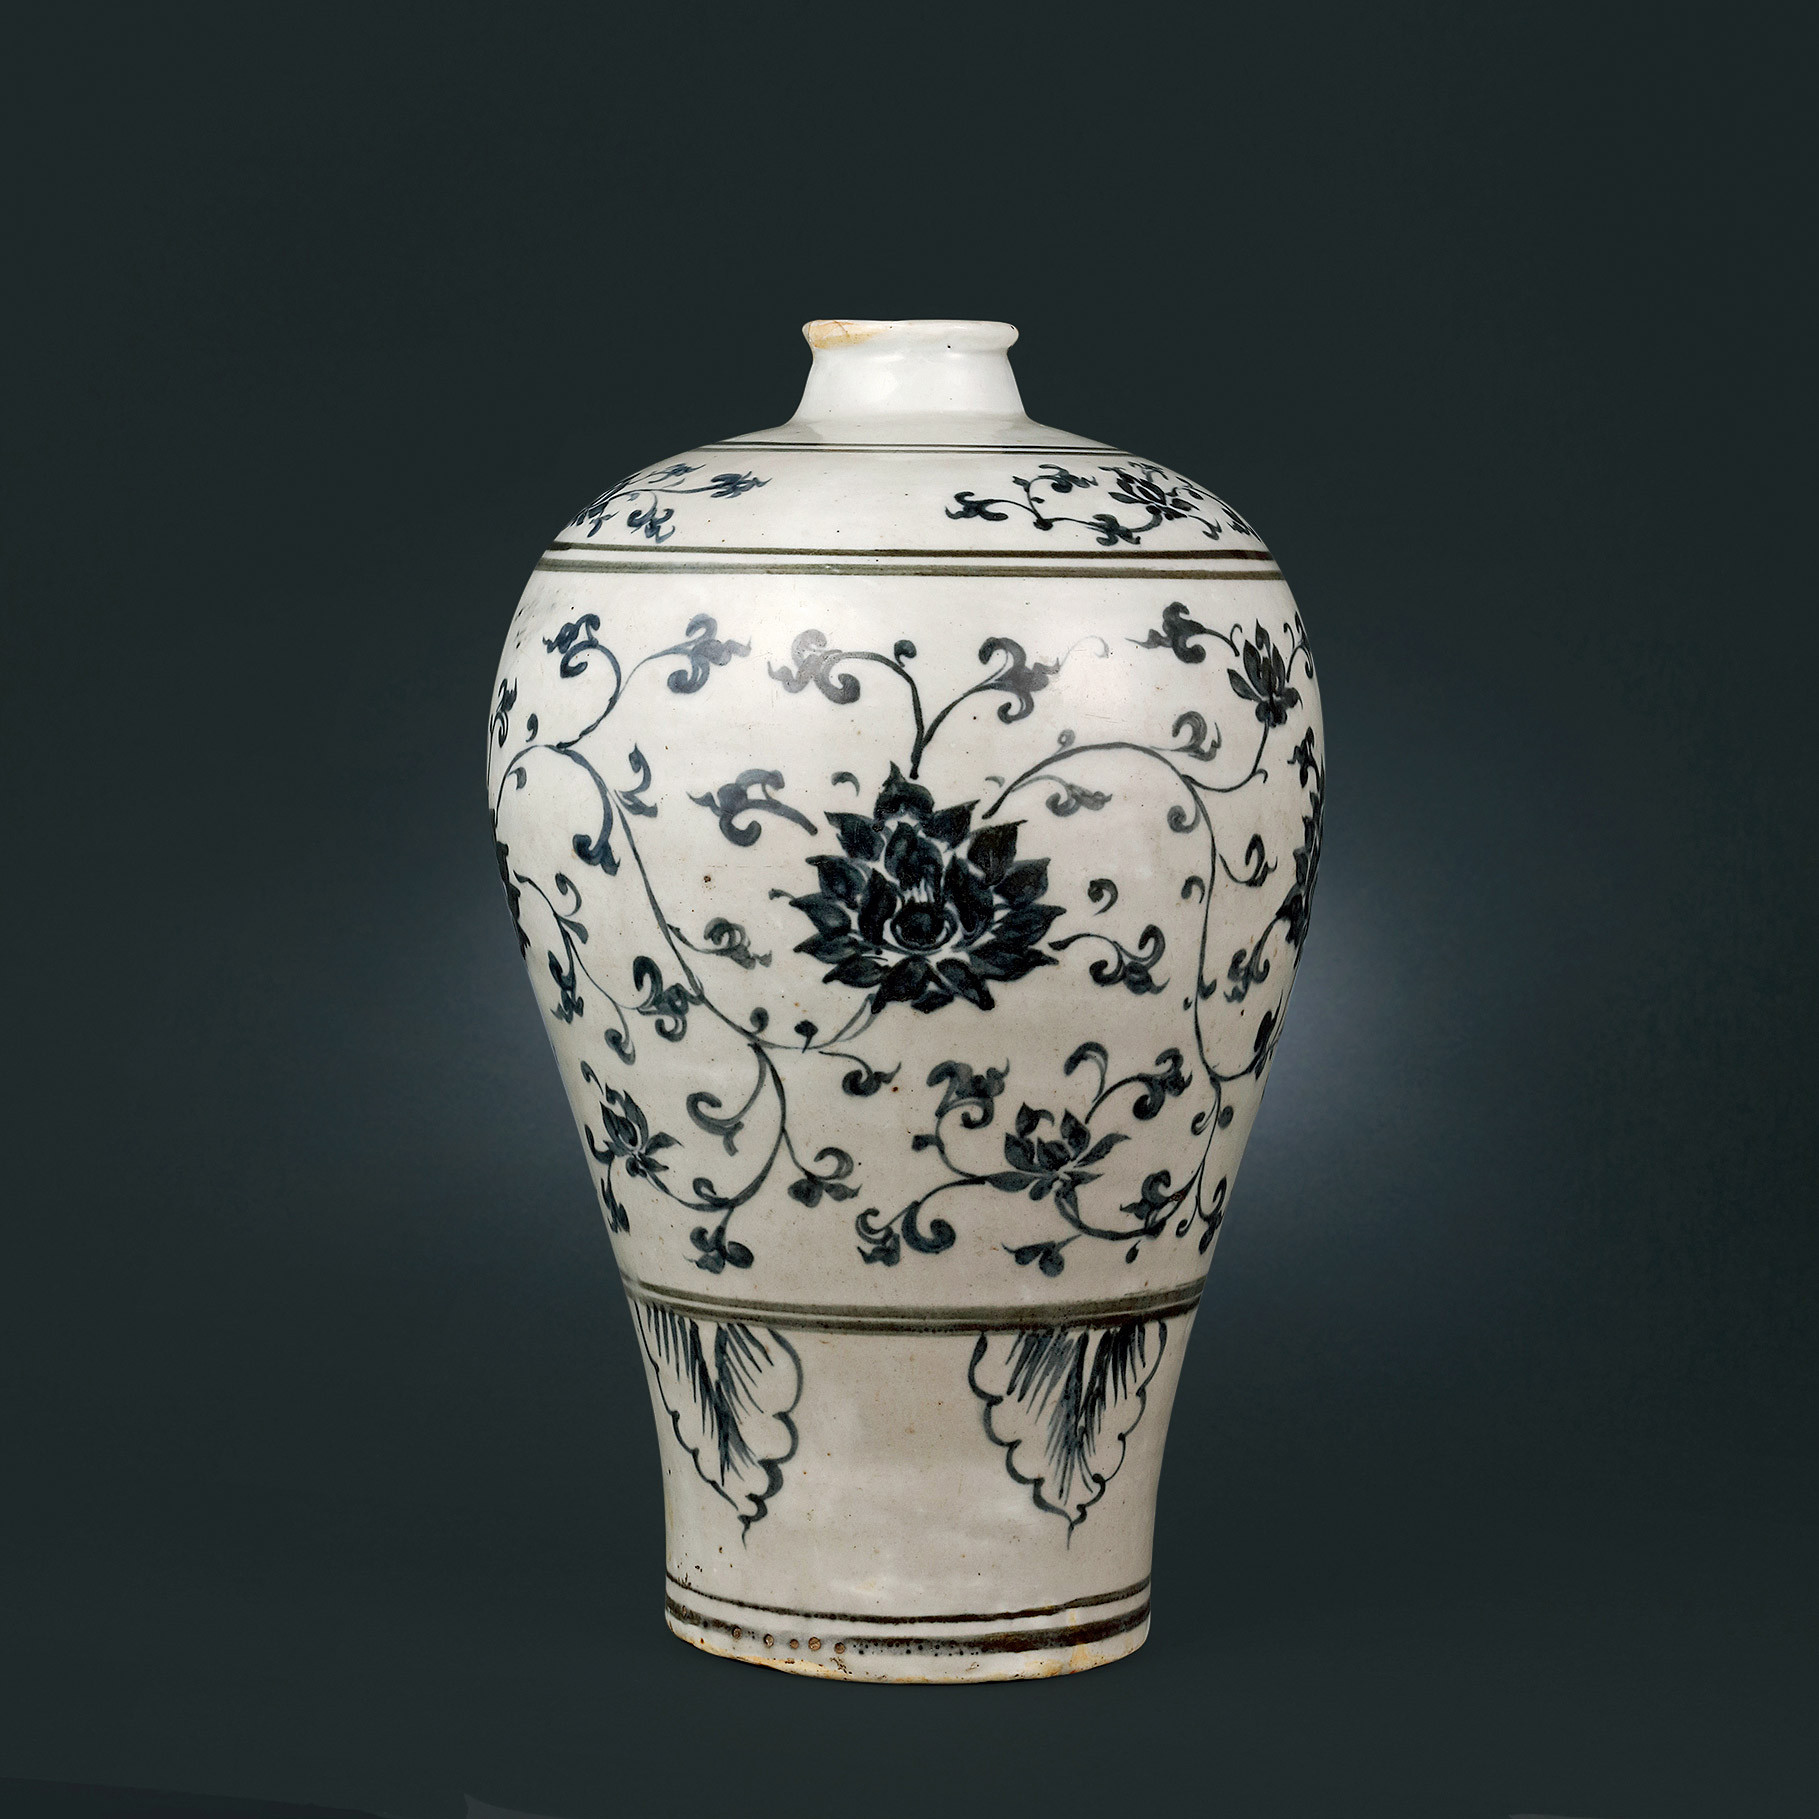 A BLUE AND WHITE PLUM VASE WITH FLOWER DESIGN